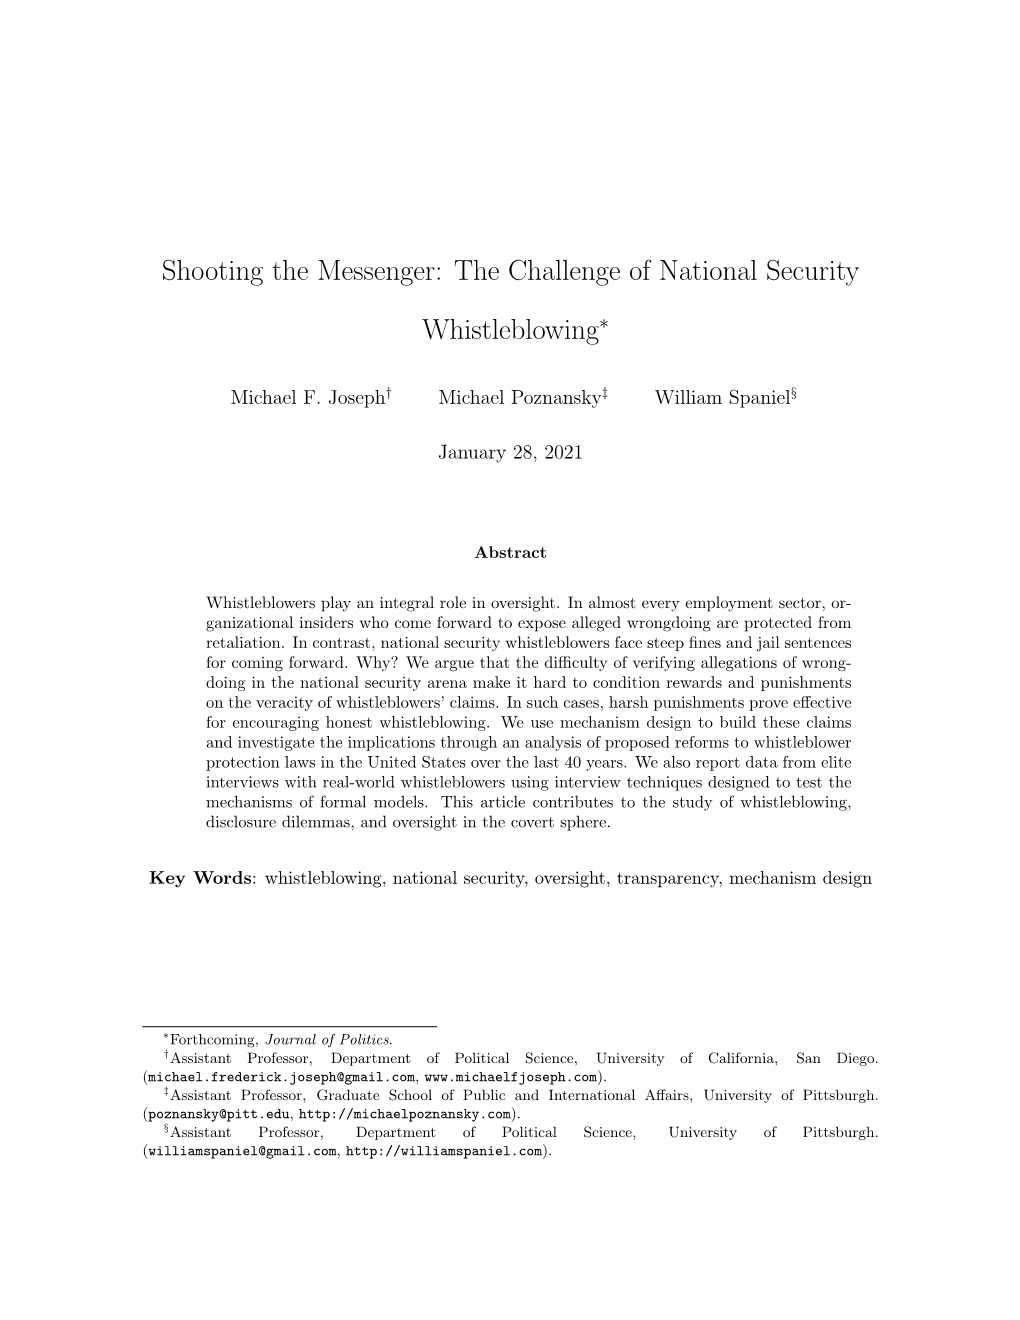 The Challenge of National Security Whistleblowing